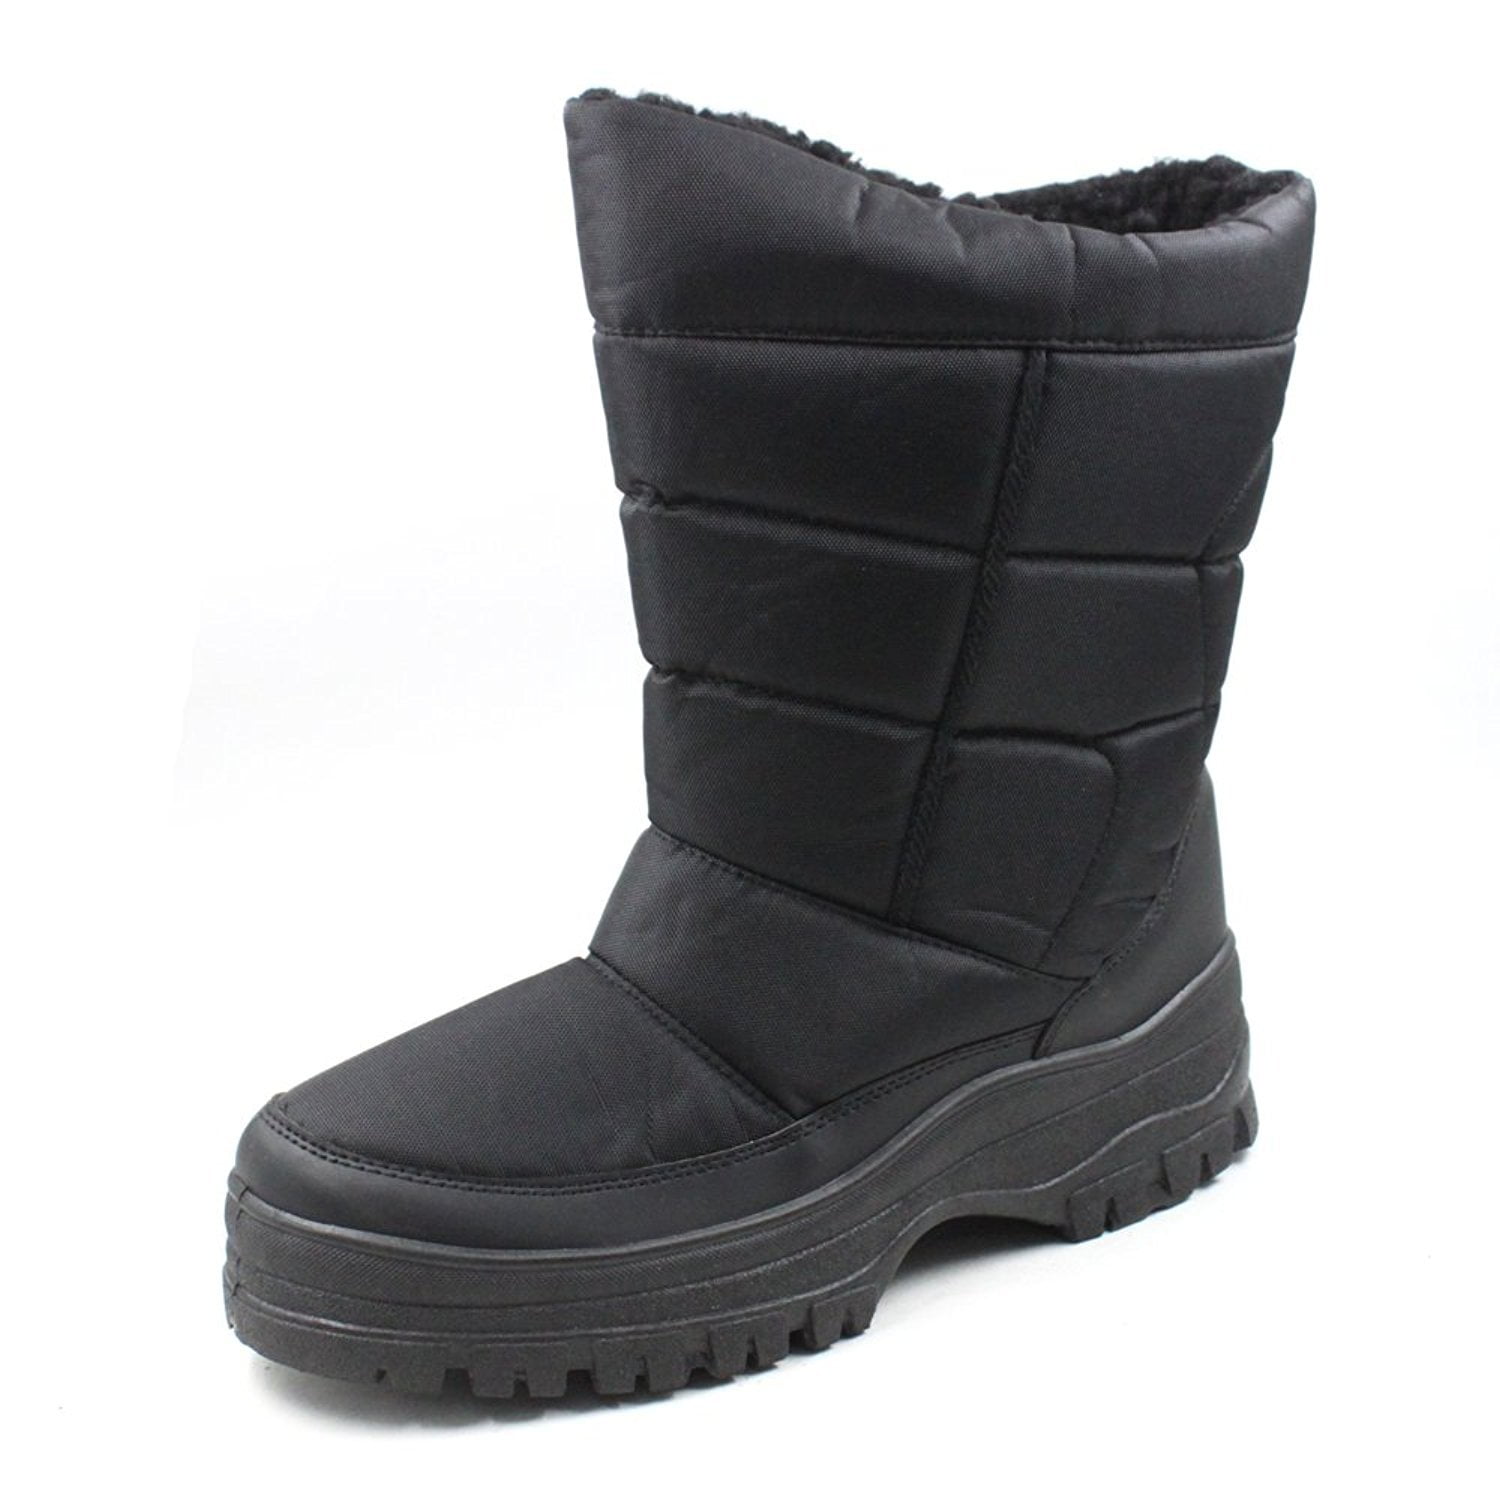 Skadoo Mens Snow Winter Cold Weather Boots 